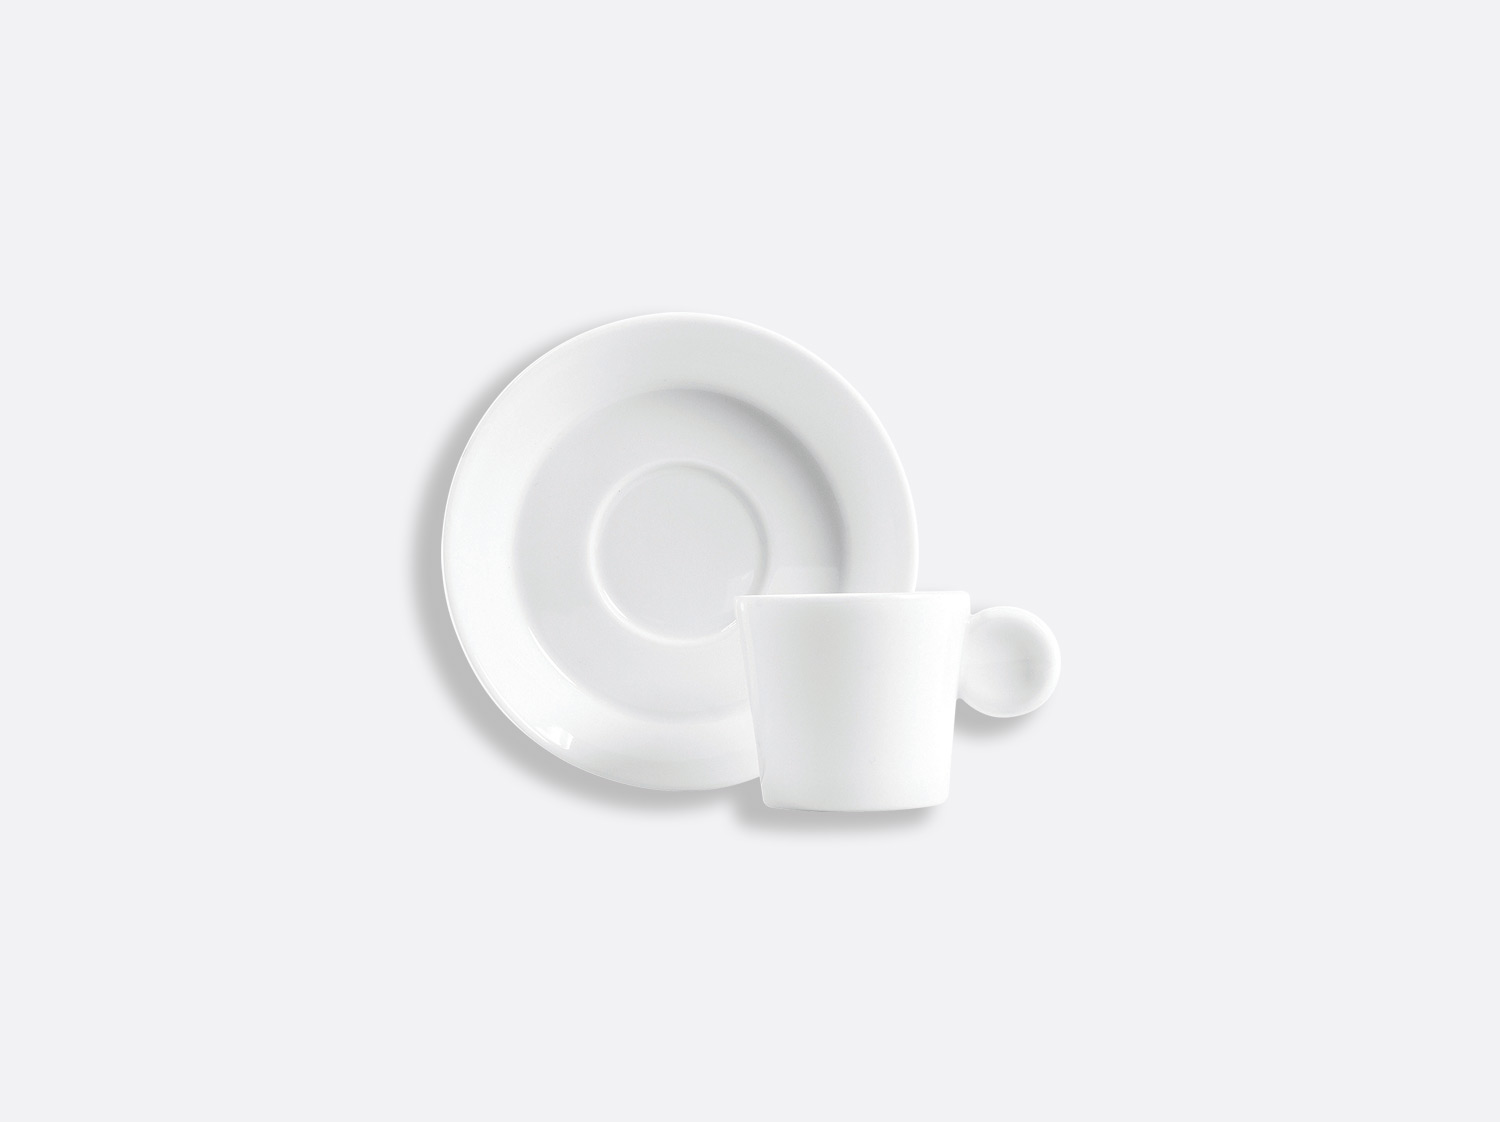 China Irazu espresso cup and saucer 1.4 oz of the collection Fantaisies blanches | Bernardaud